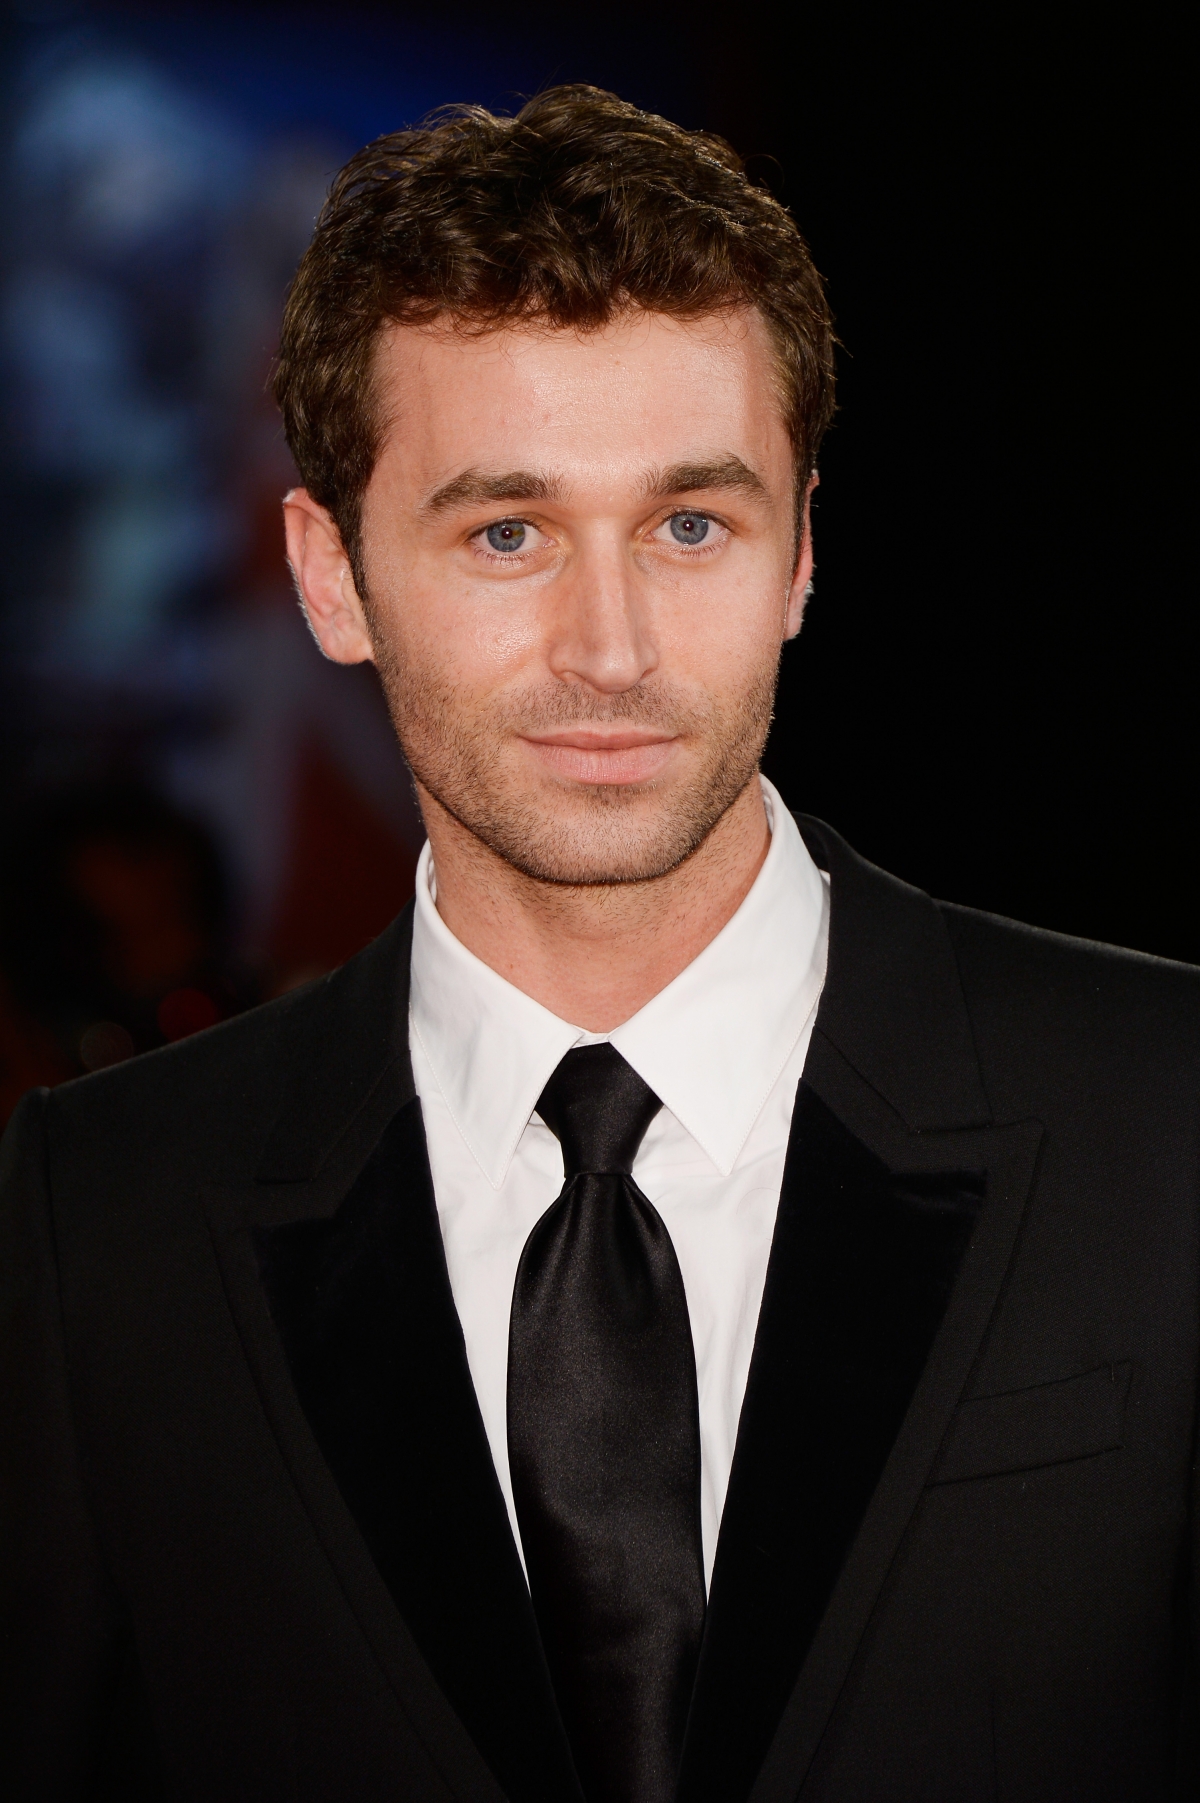 Self-proclaimed feminist porn star James Deen accused of